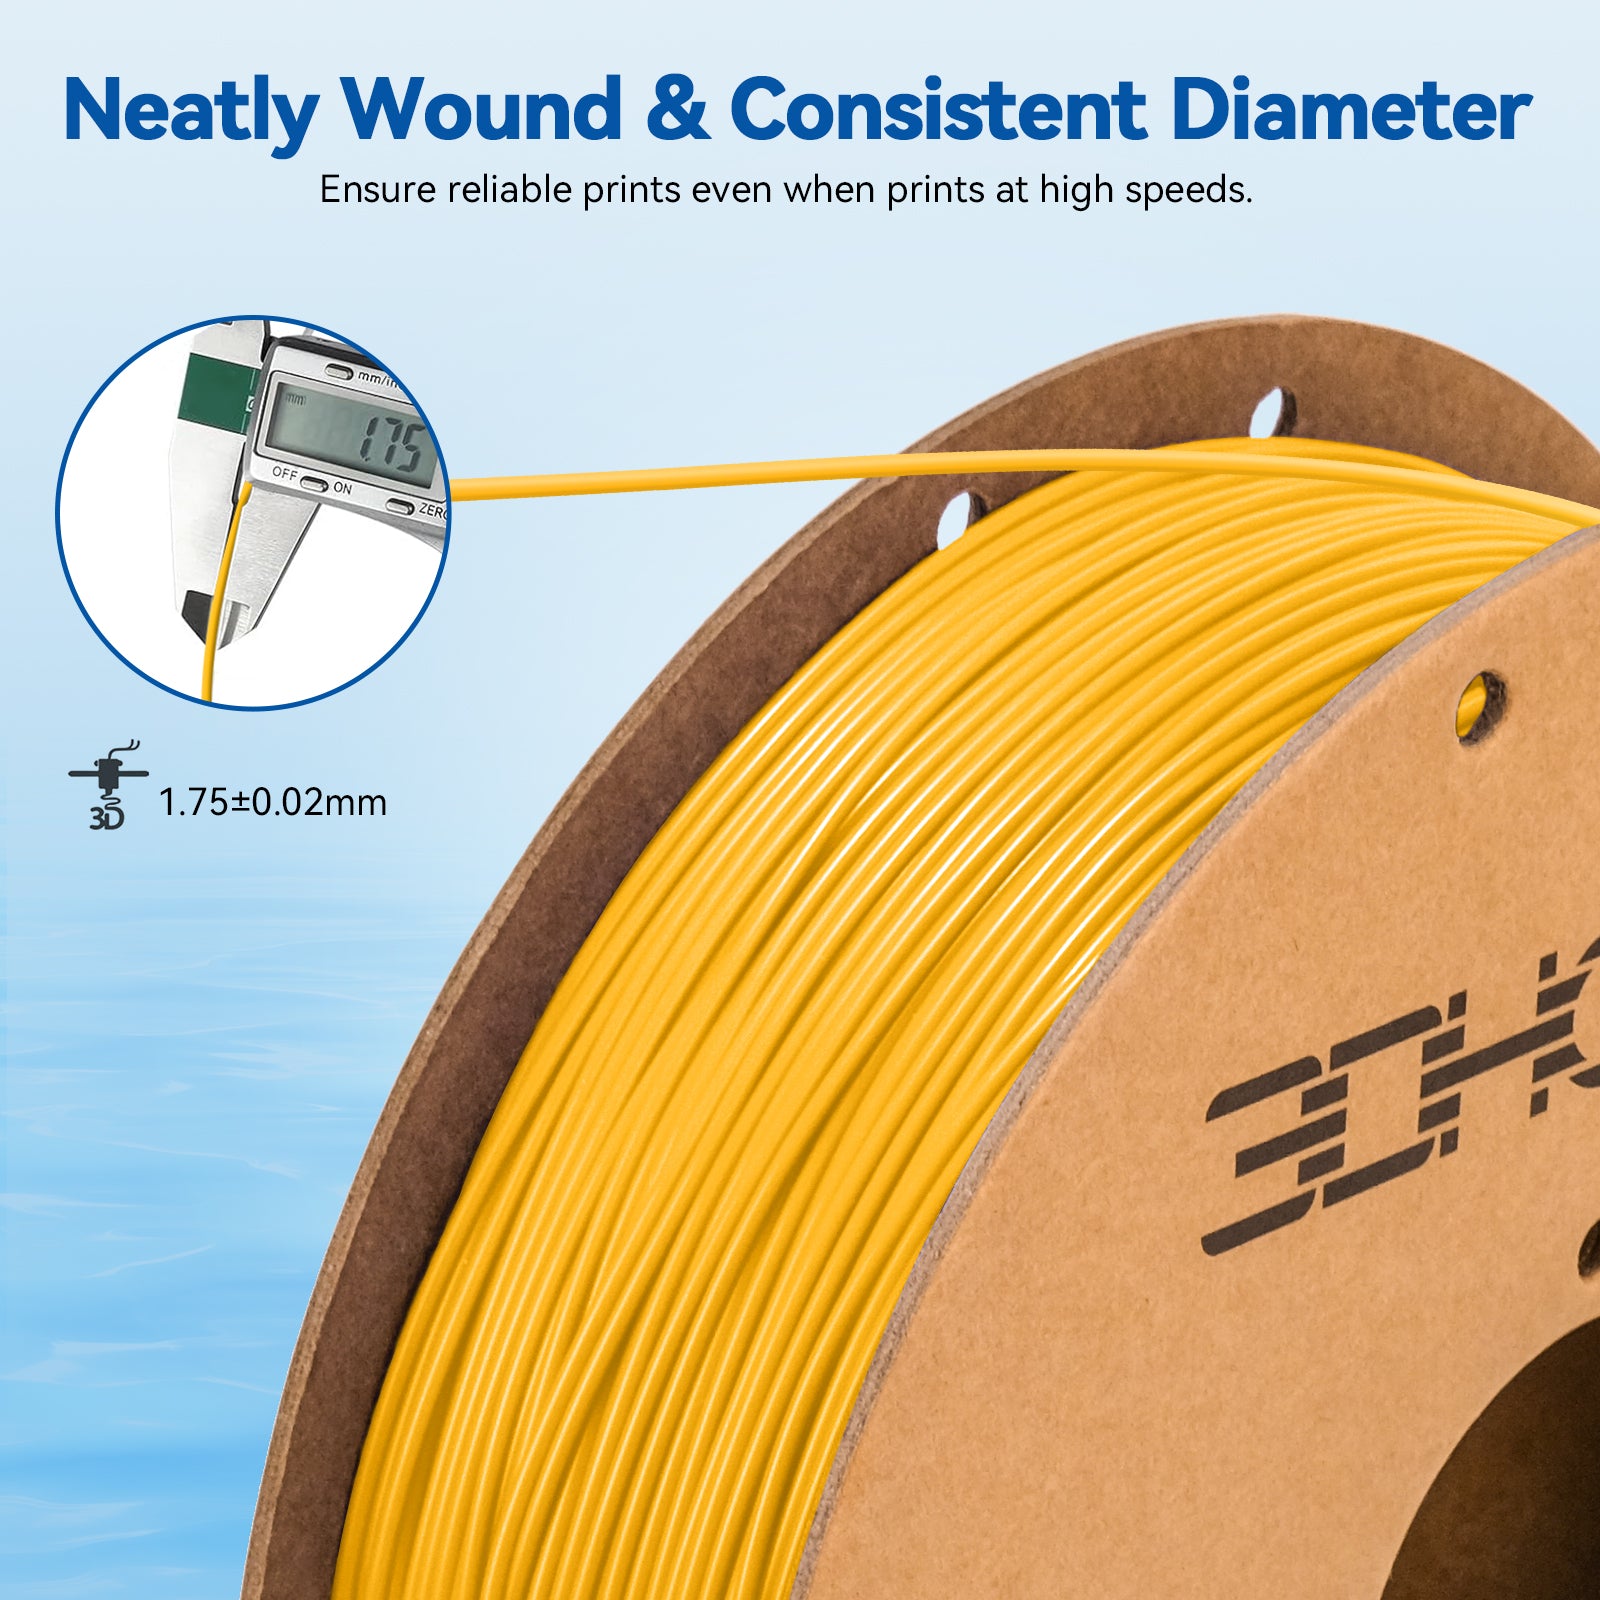 3DHoJor PLA High Speed Printer Filament 1.75mm 1kg Cardboard Spool (2.2lbs) Rapid PLA to 5X Faster Printing Filament PLA Dimensional Accuracy +/- 0.02 mm Fits for Most FDM 3D Printer-Yellow